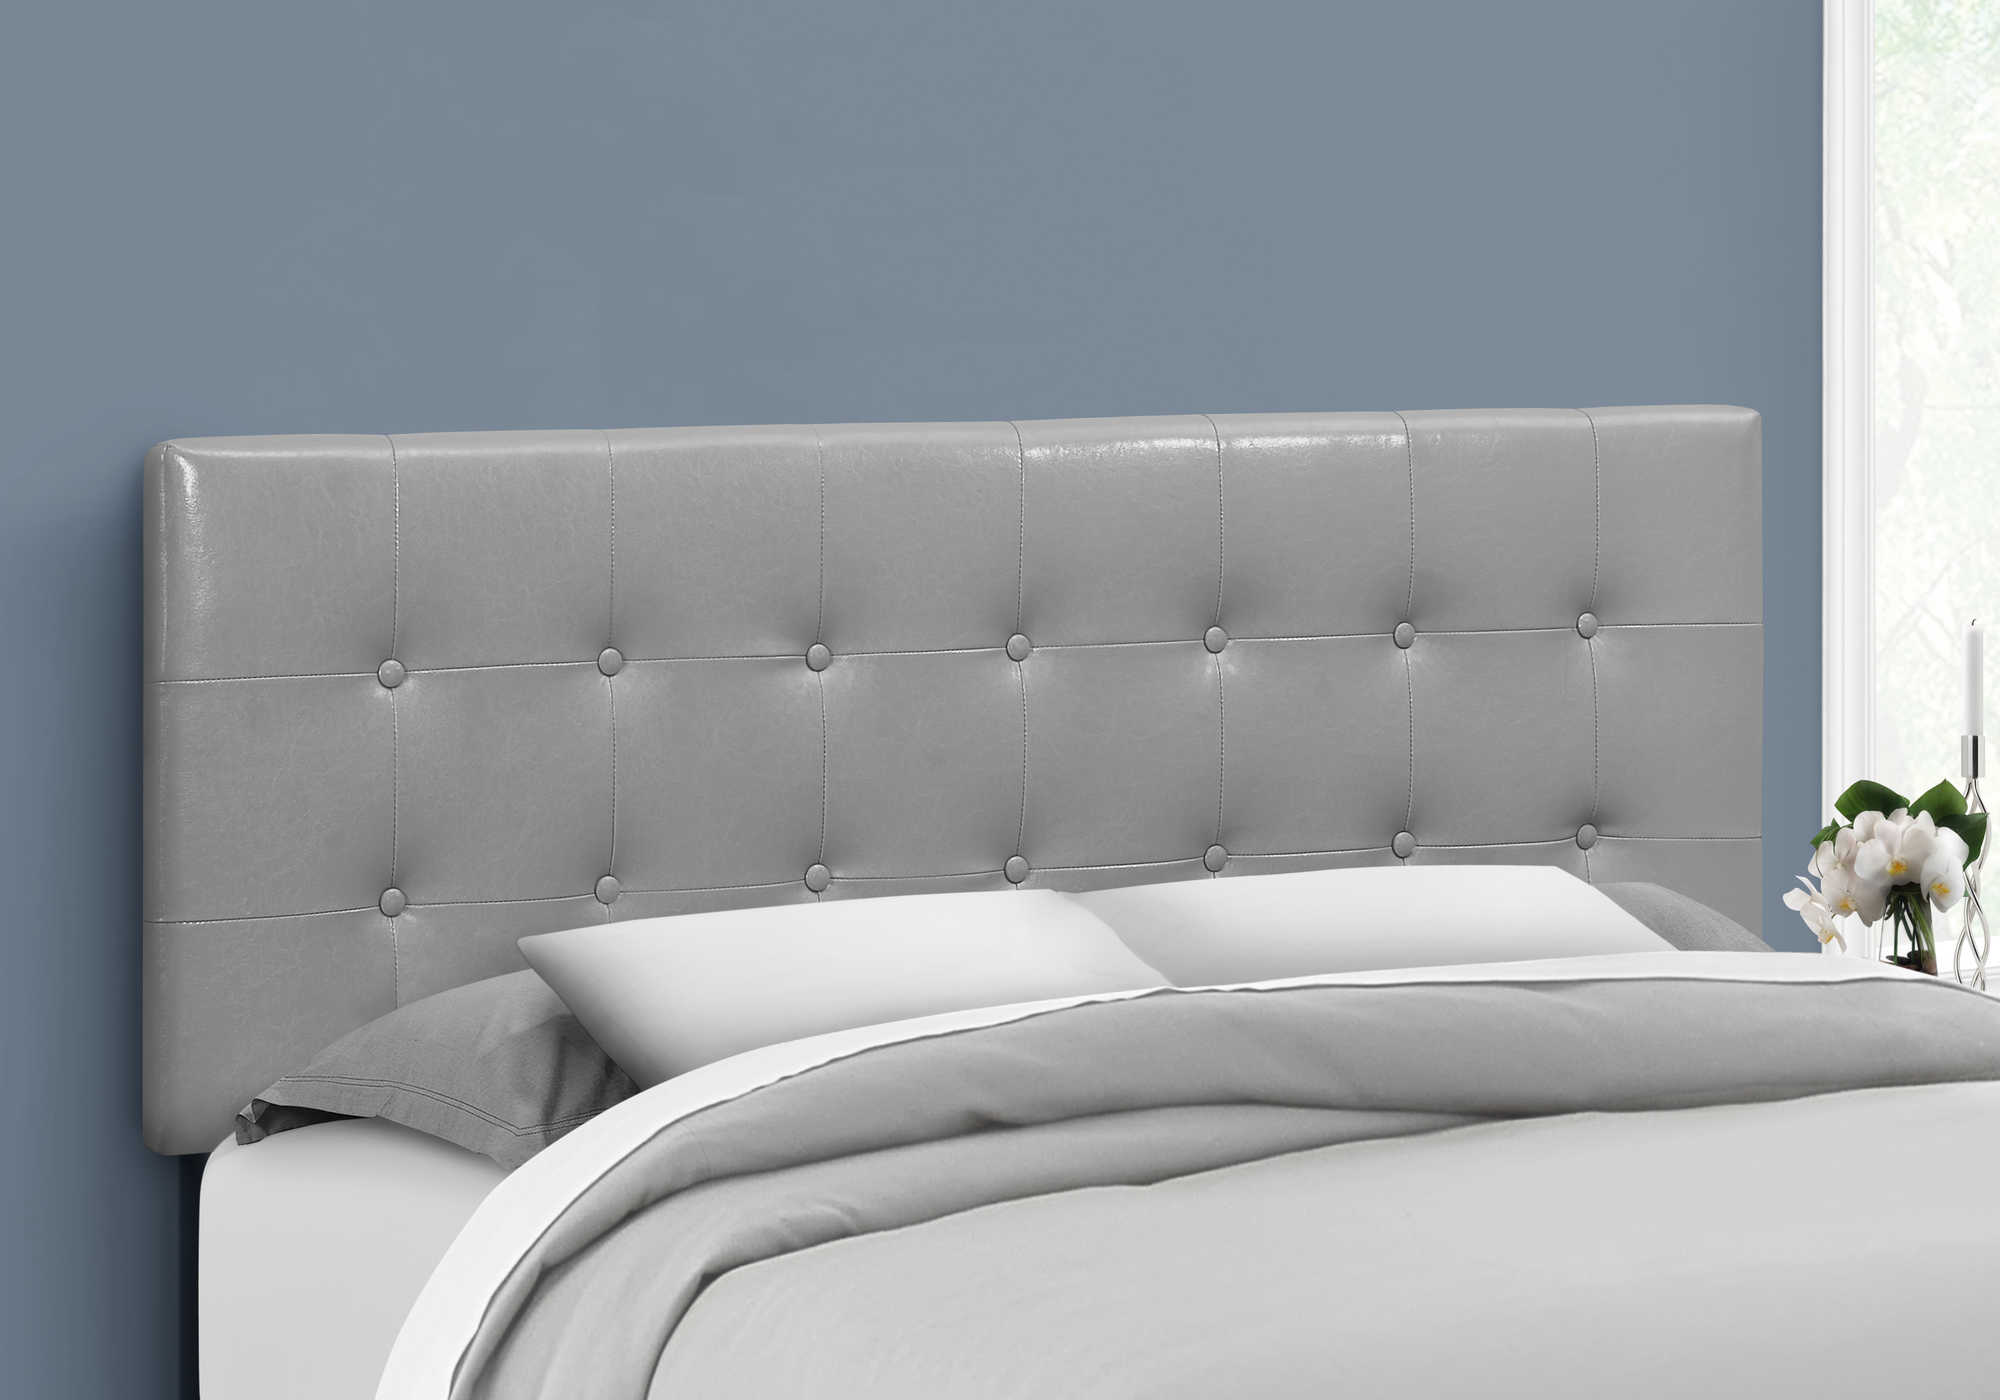 BED - QUEEN SIZE / GREY LEATHER-LOOK HEADBOARD ONLY